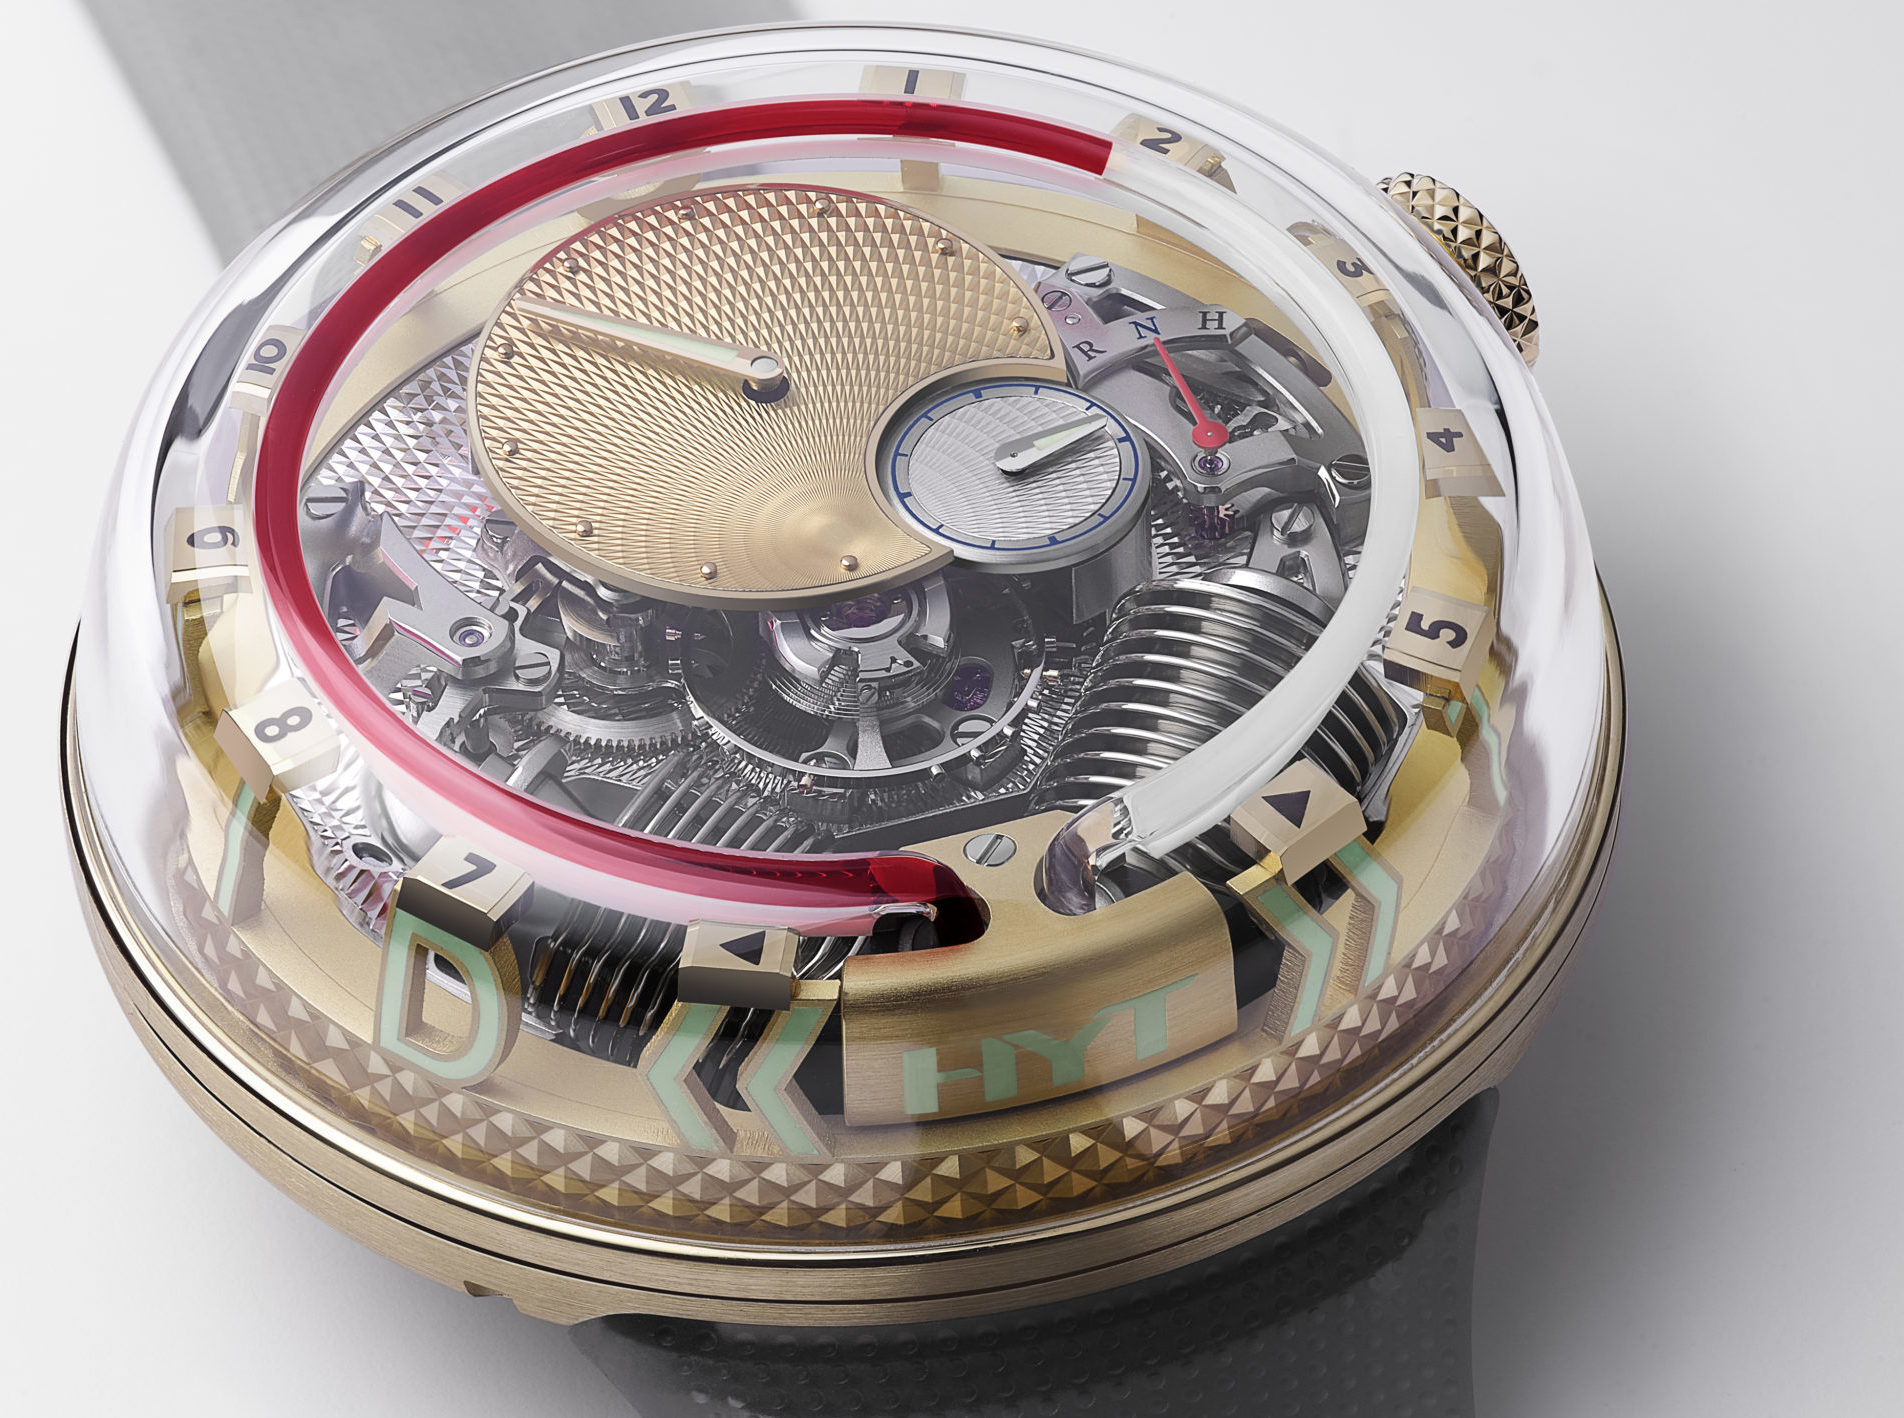 Independent Watchmakers Are Having A Moment